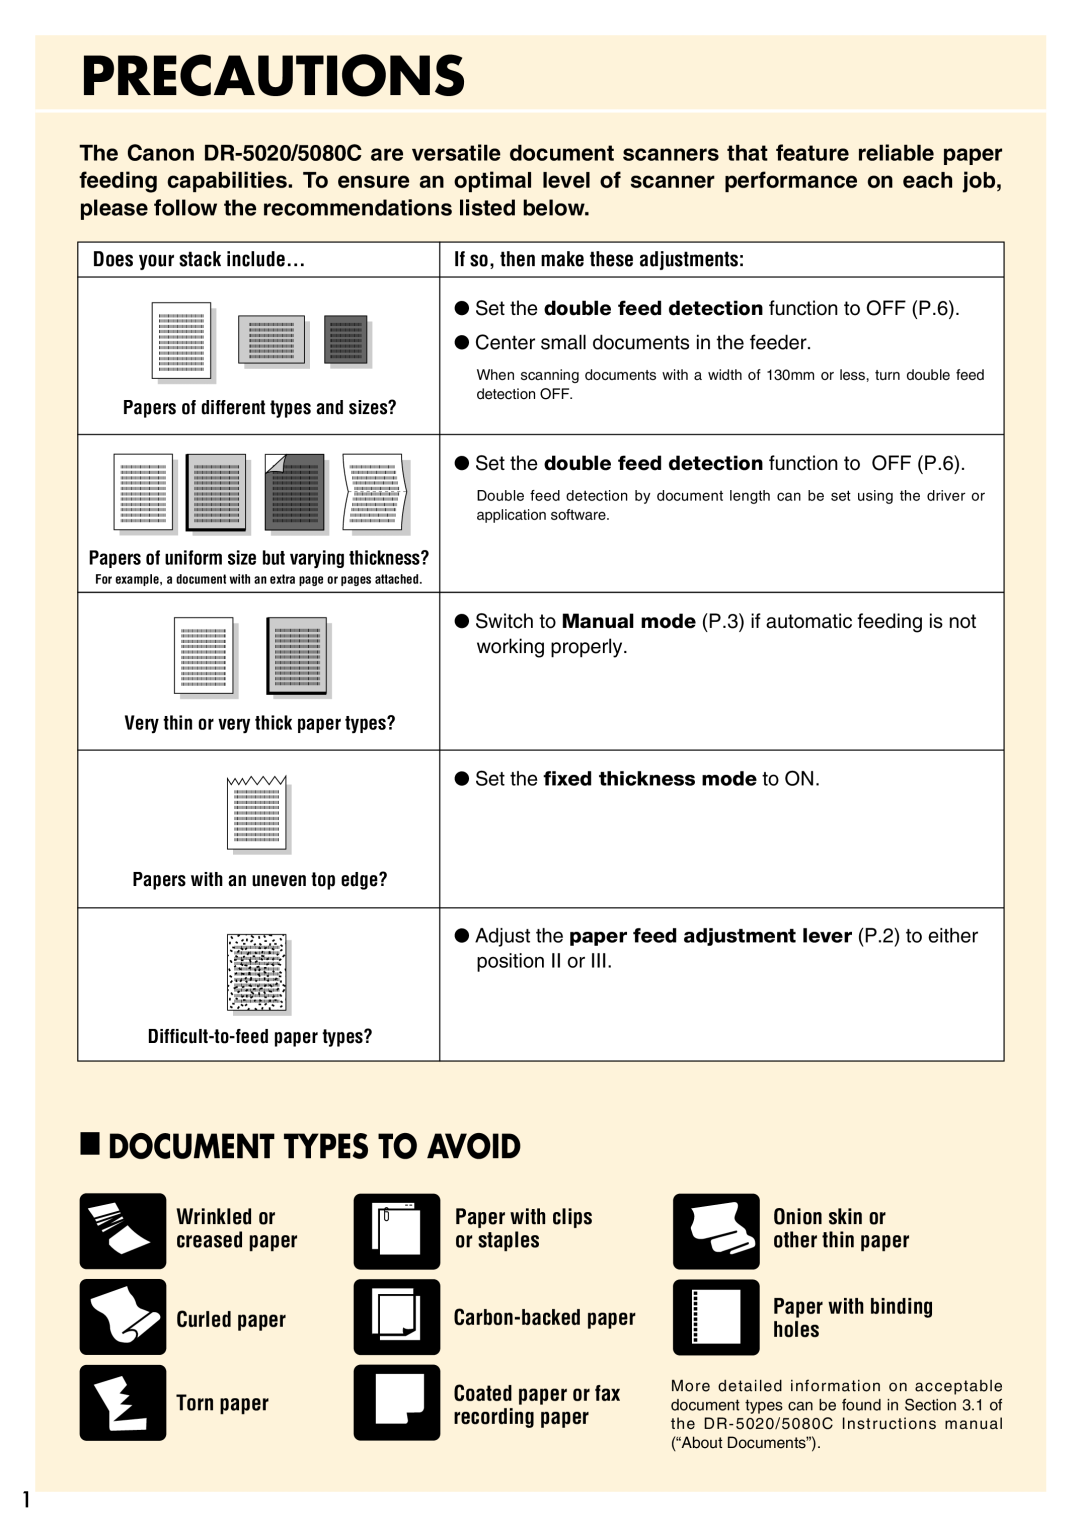 Canon DR-5080C, DR-5020 Document Types To Avoid, Precautions, If so, then make these adjustments, Curled paper Torn paper 